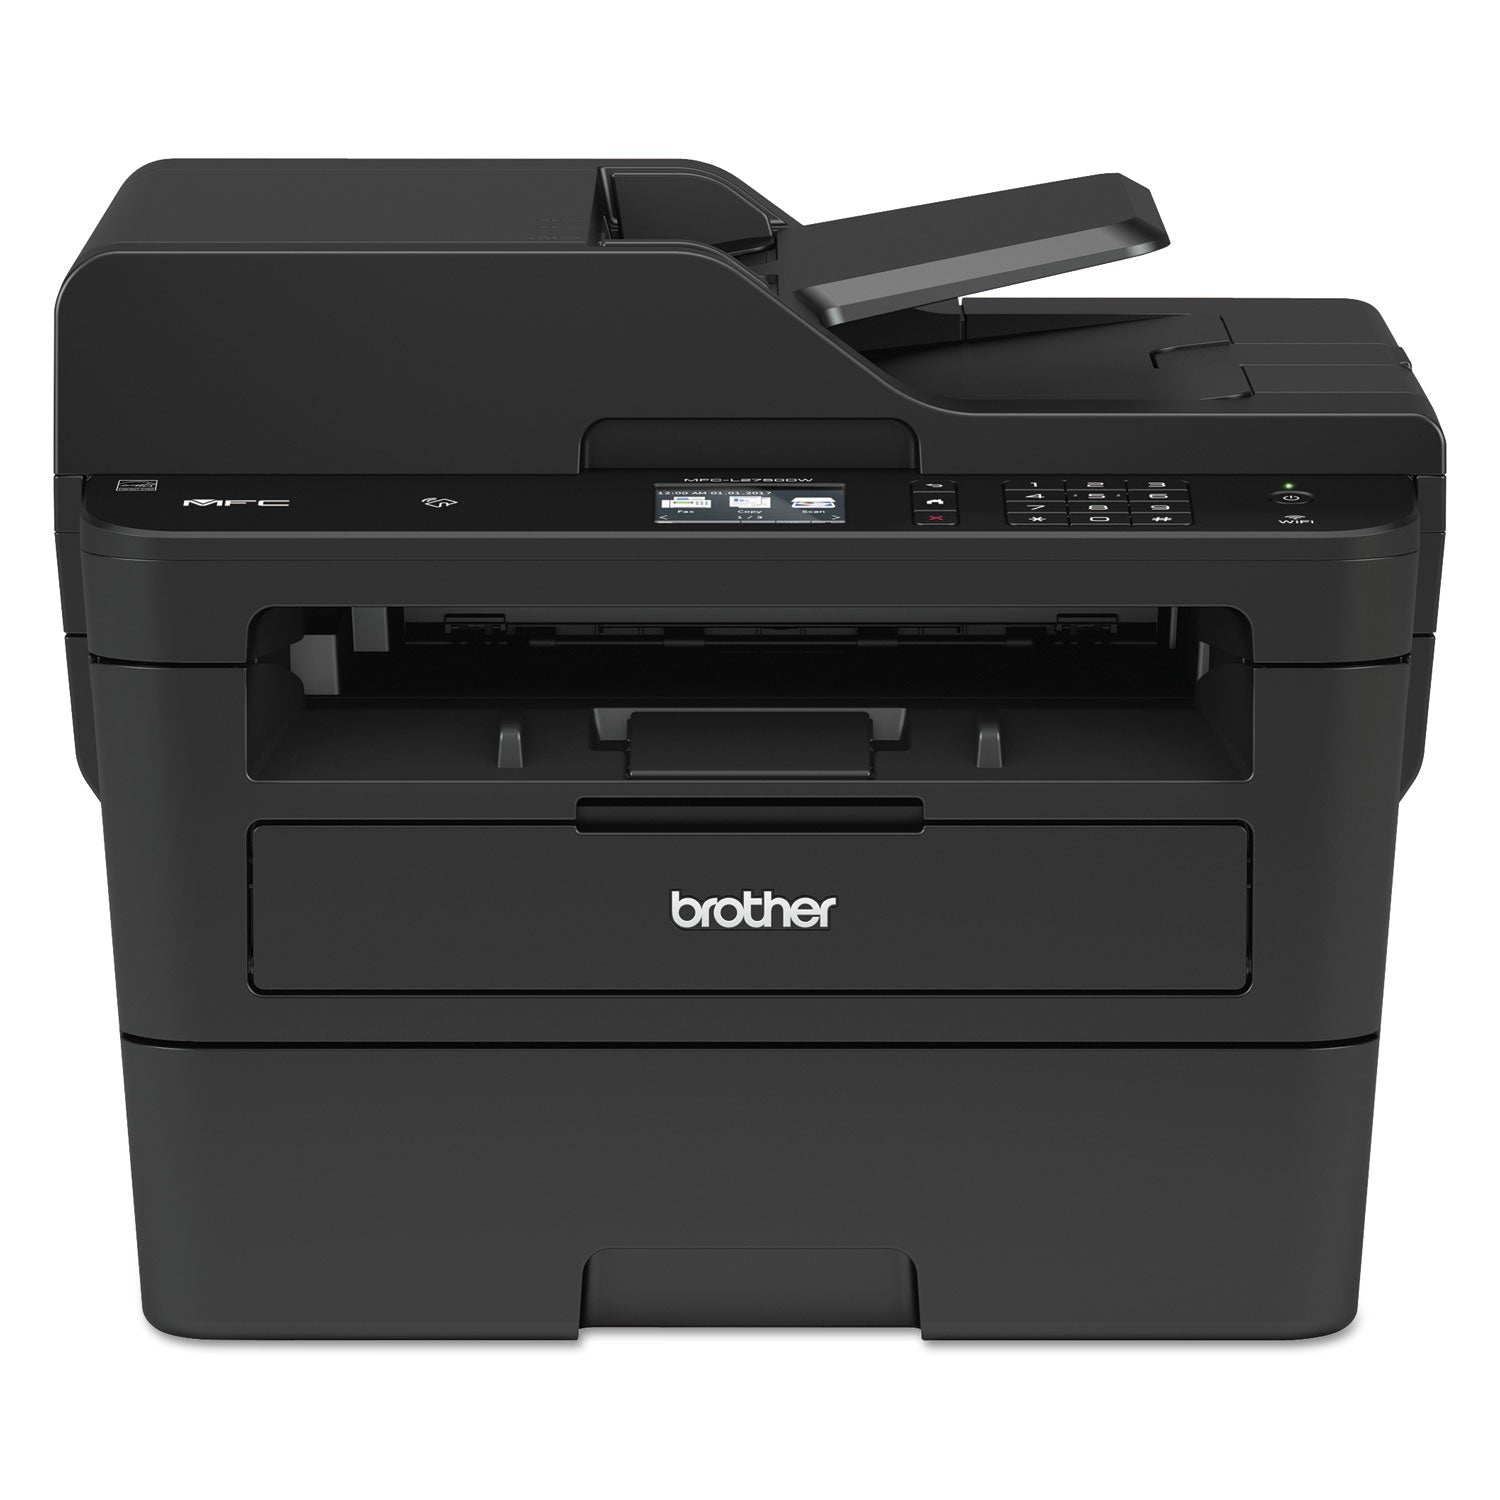 mfcl2750dw-compact-laser-all-in-one-printer-with-single-pass-duplex-copy-and-scan-wireless-and-nfc_brtmfcl2750dw - 1